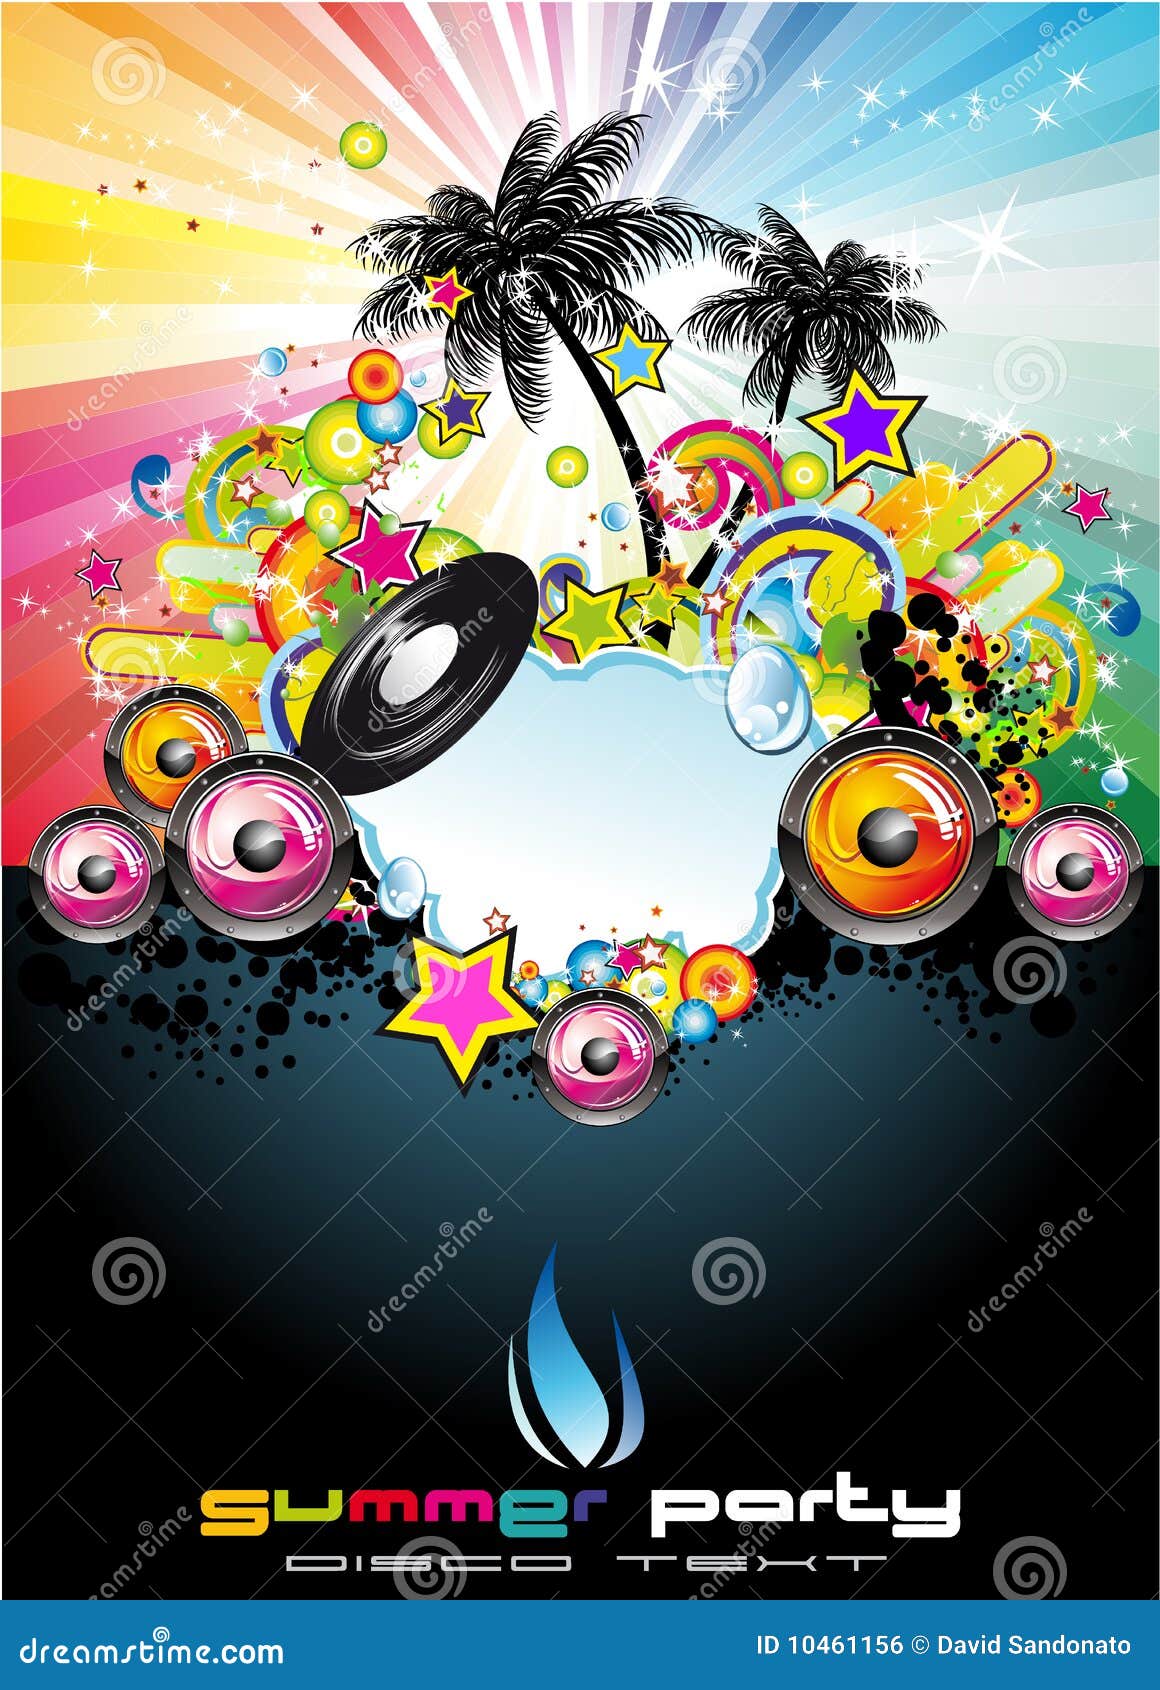 music event clipart - photo #25